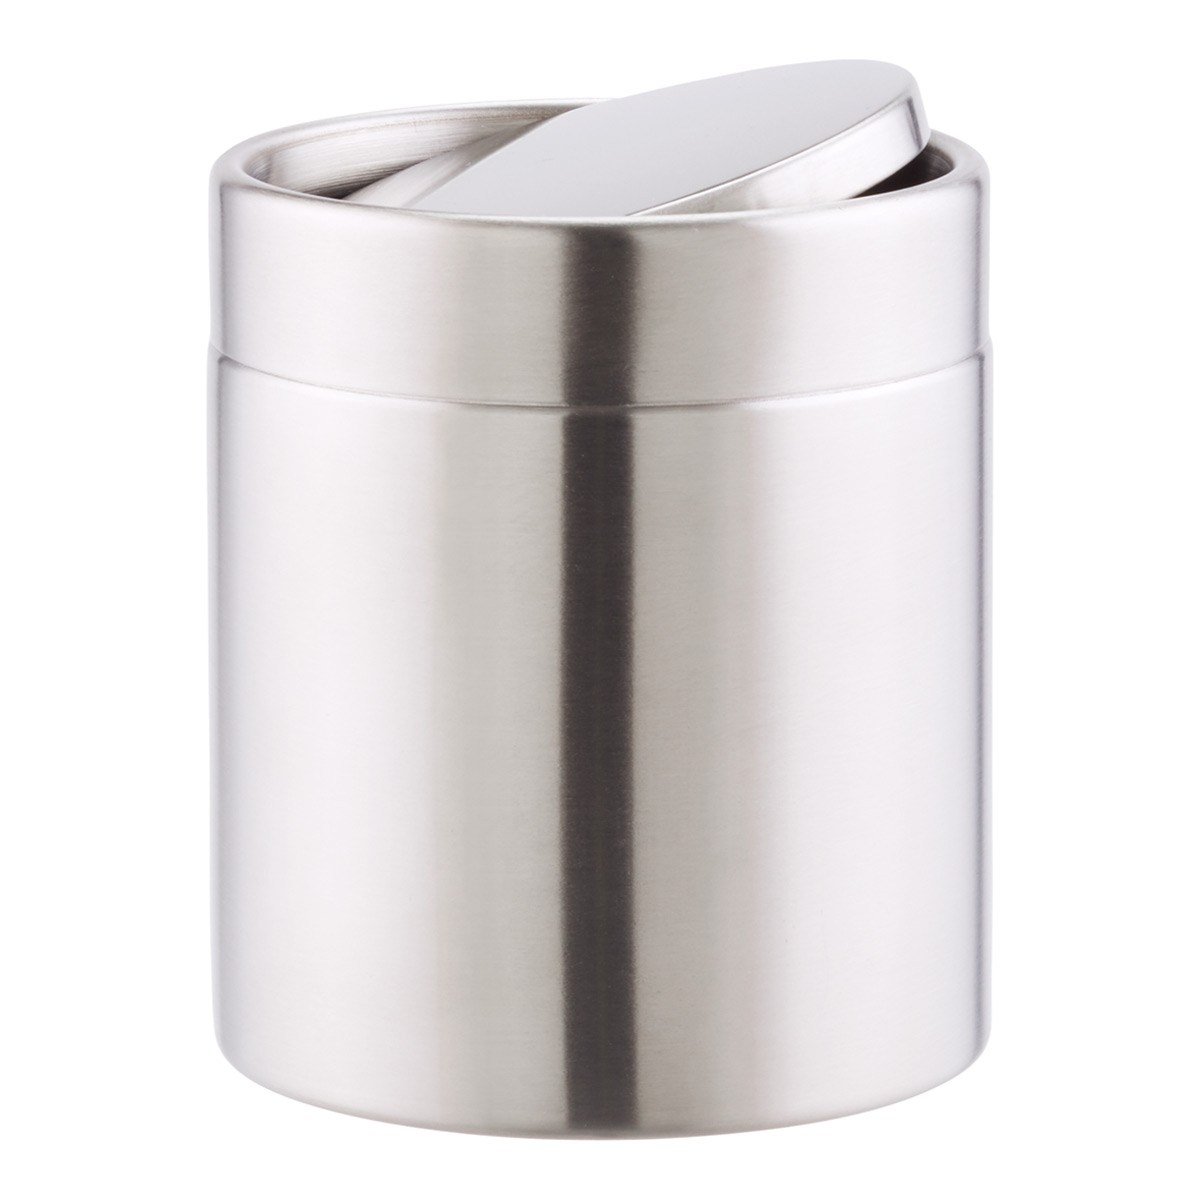 Stainless Steel Swing-Lid Countertop Trash Can | The Container Store